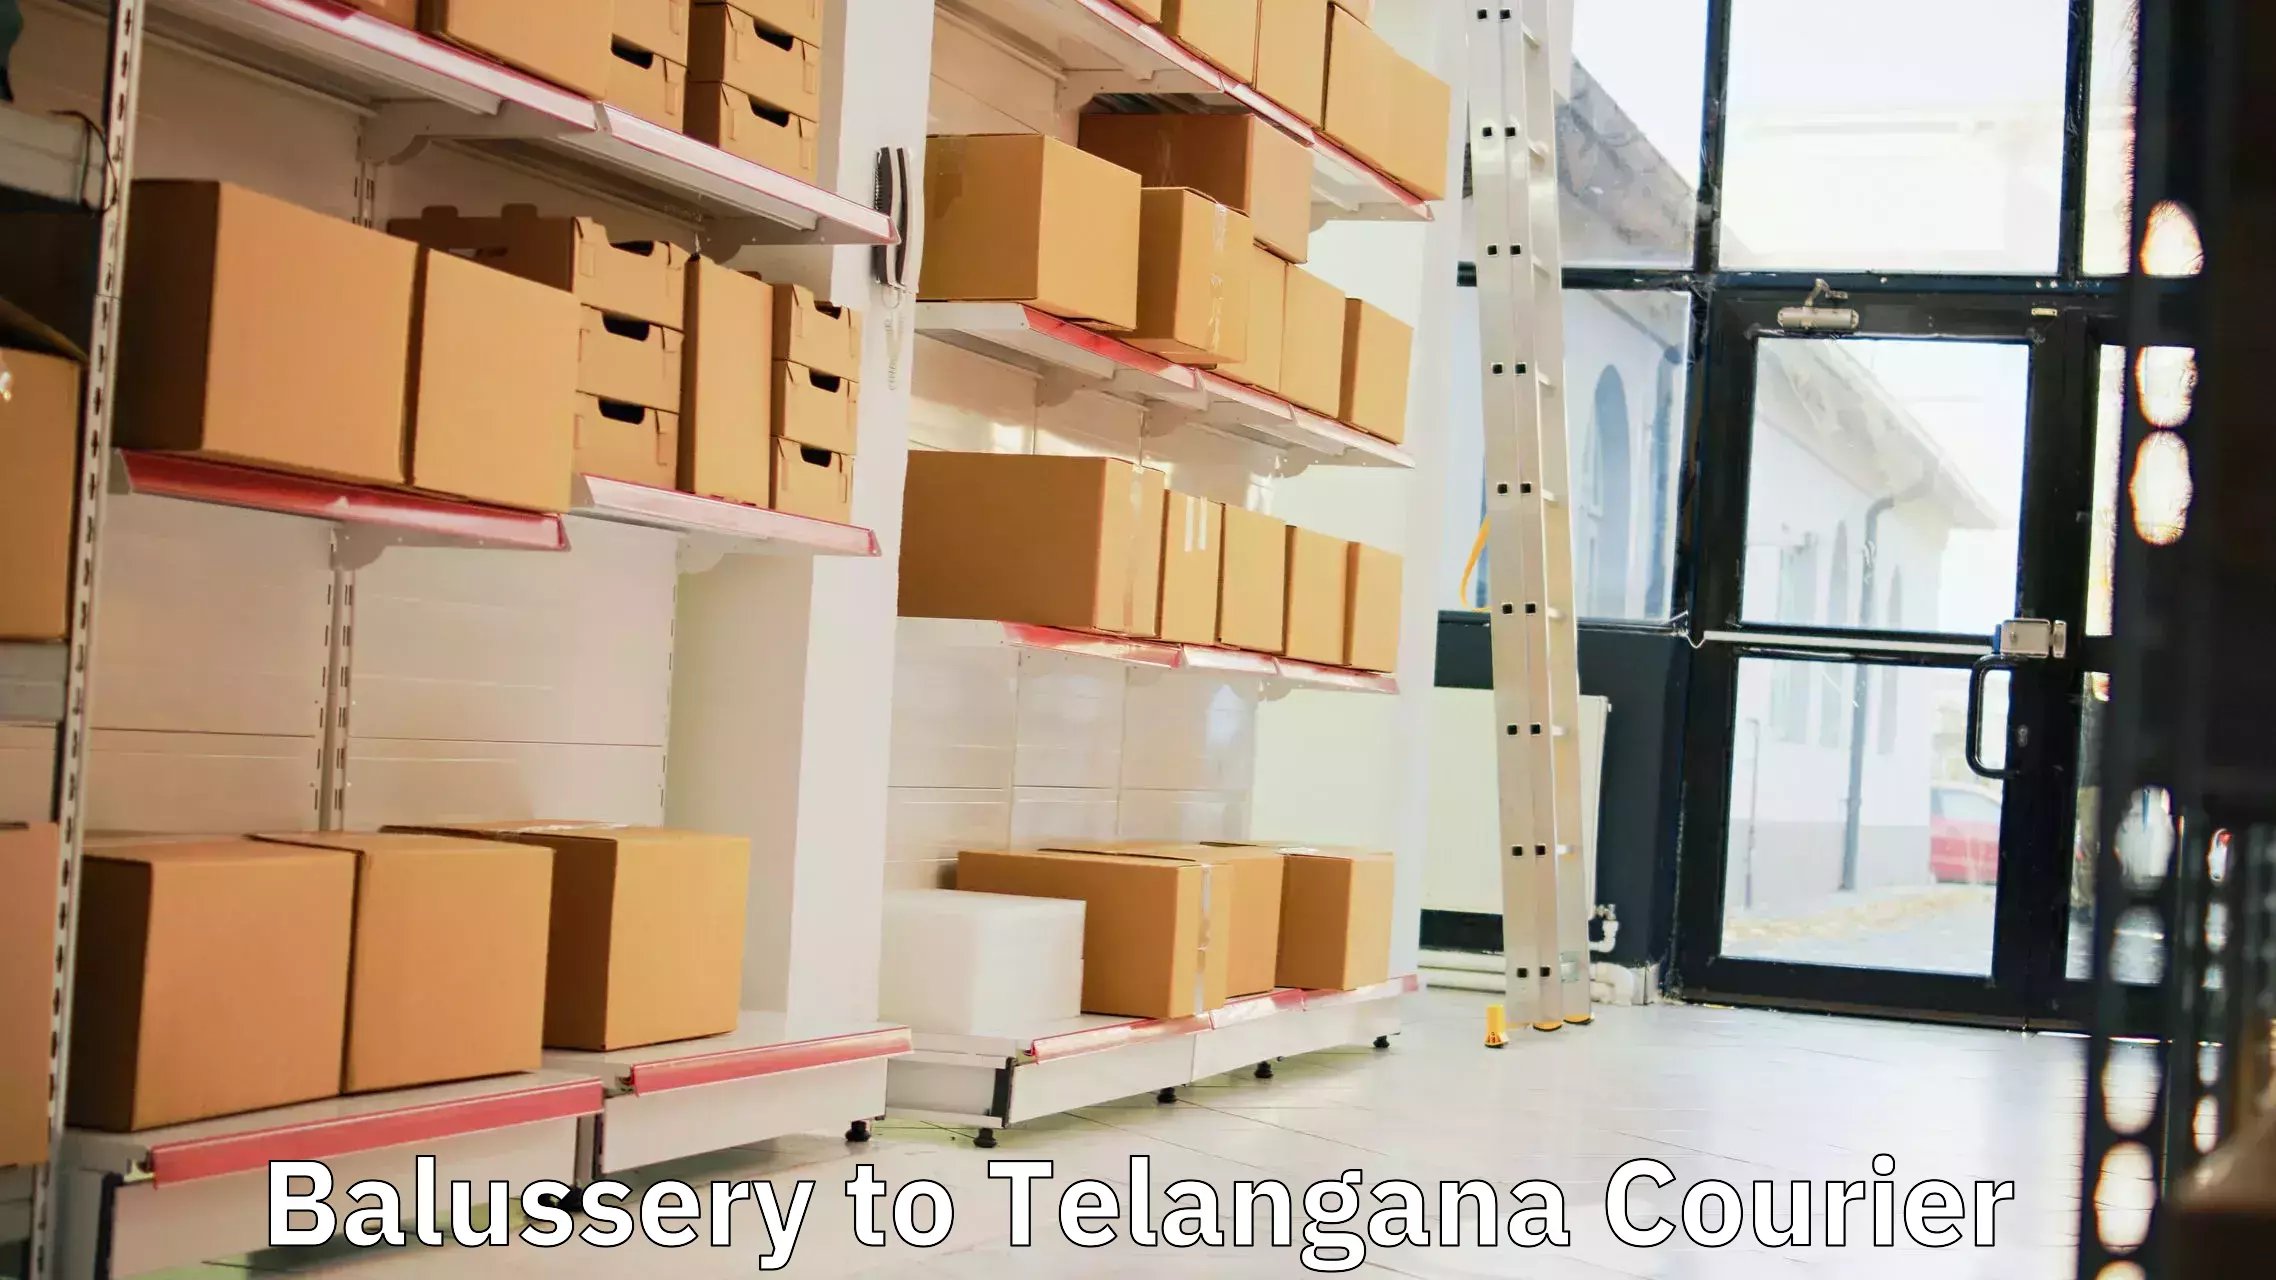 Courier service comparison Balussery to Madhavaram